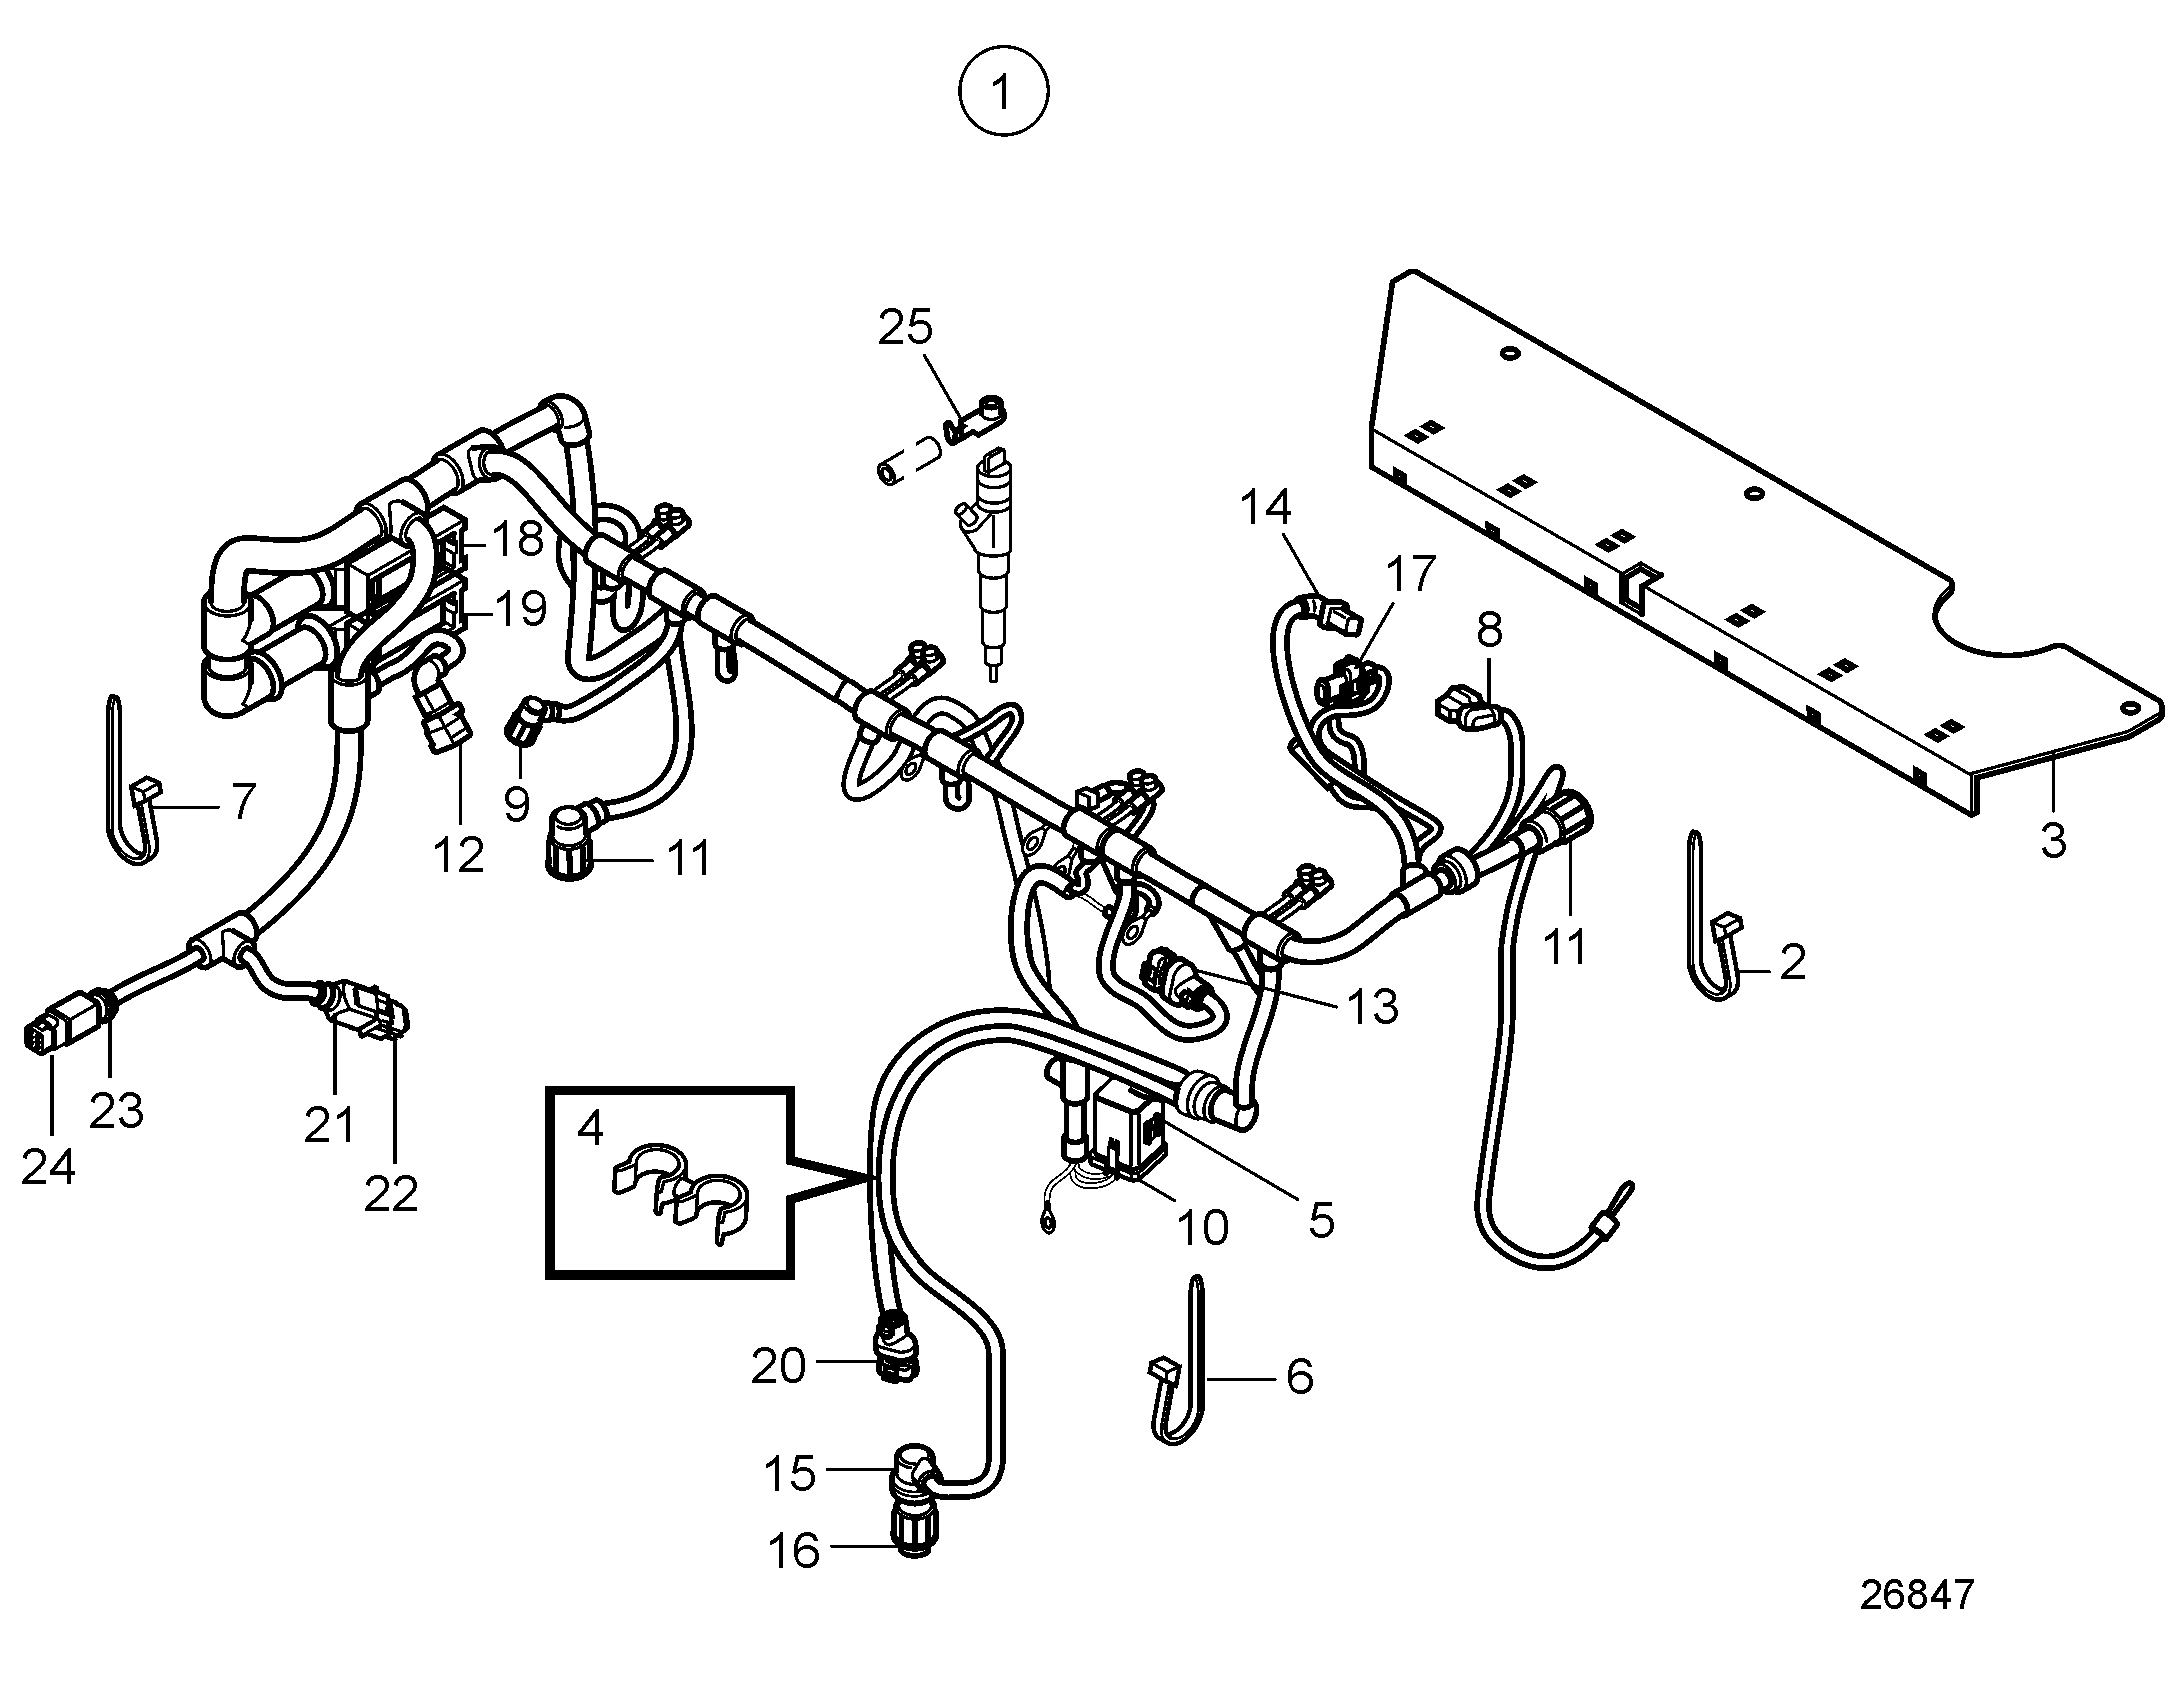 Electrical System SN-11191563